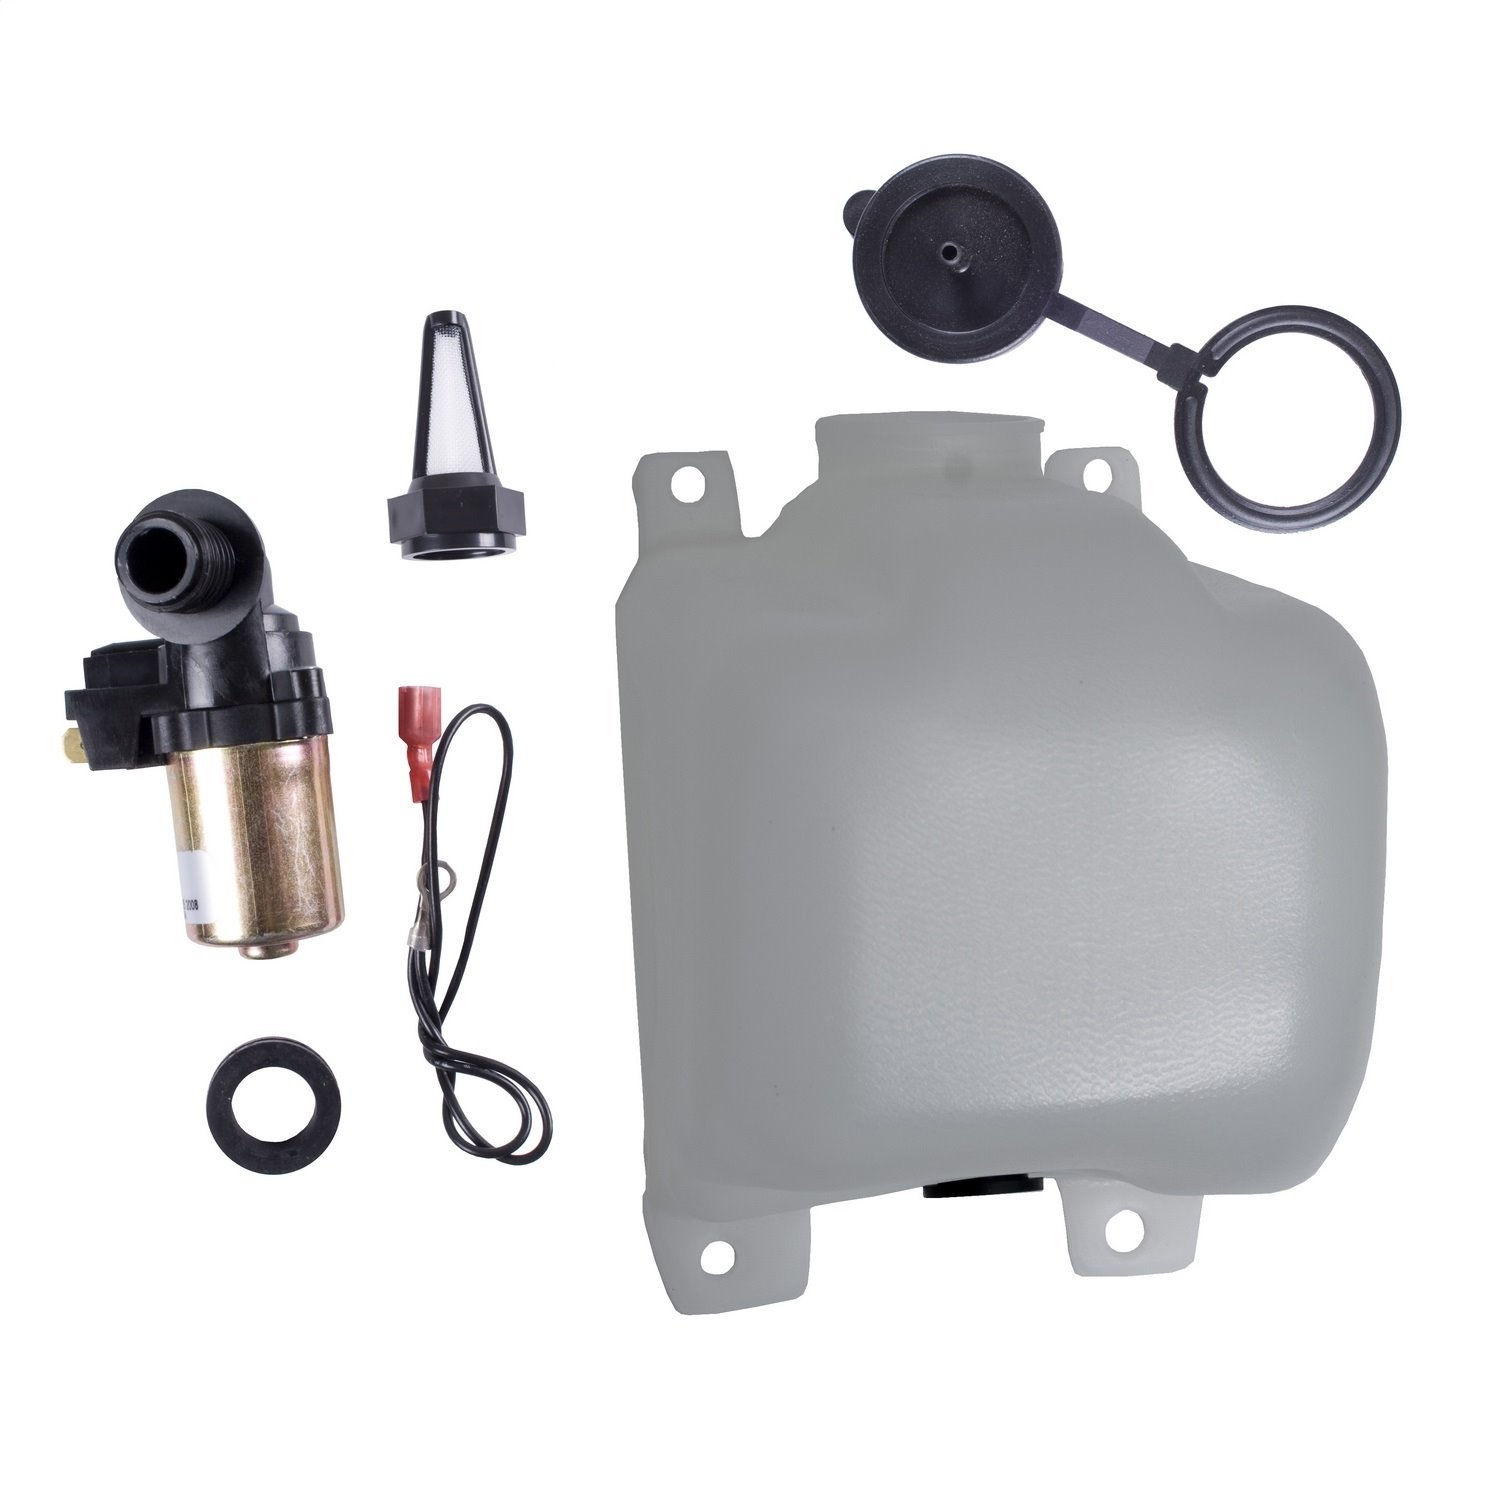 This OEM washer bottle kit from Omix-ADA includes the bottle pump cap gasket and filter fits 72-86 Jeep CJ5 CJ7 and CJ8.